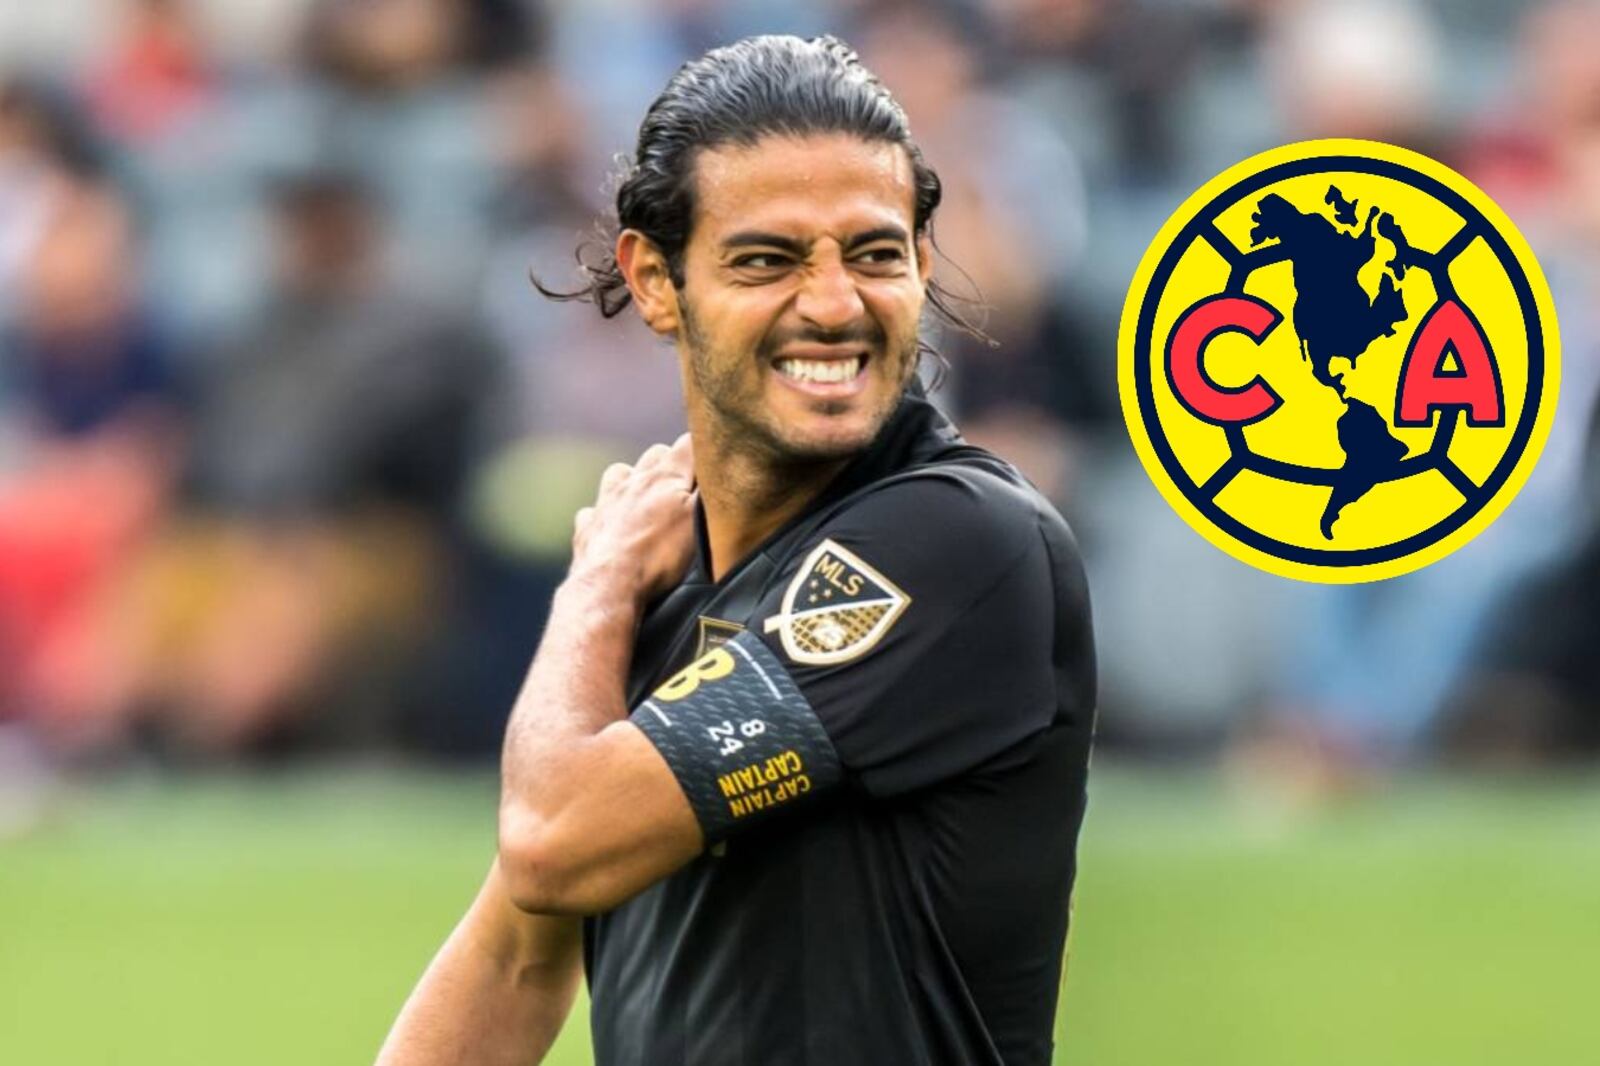 Carlos Vela could finally arrive in Club América if this coach replaces Santiago Solari